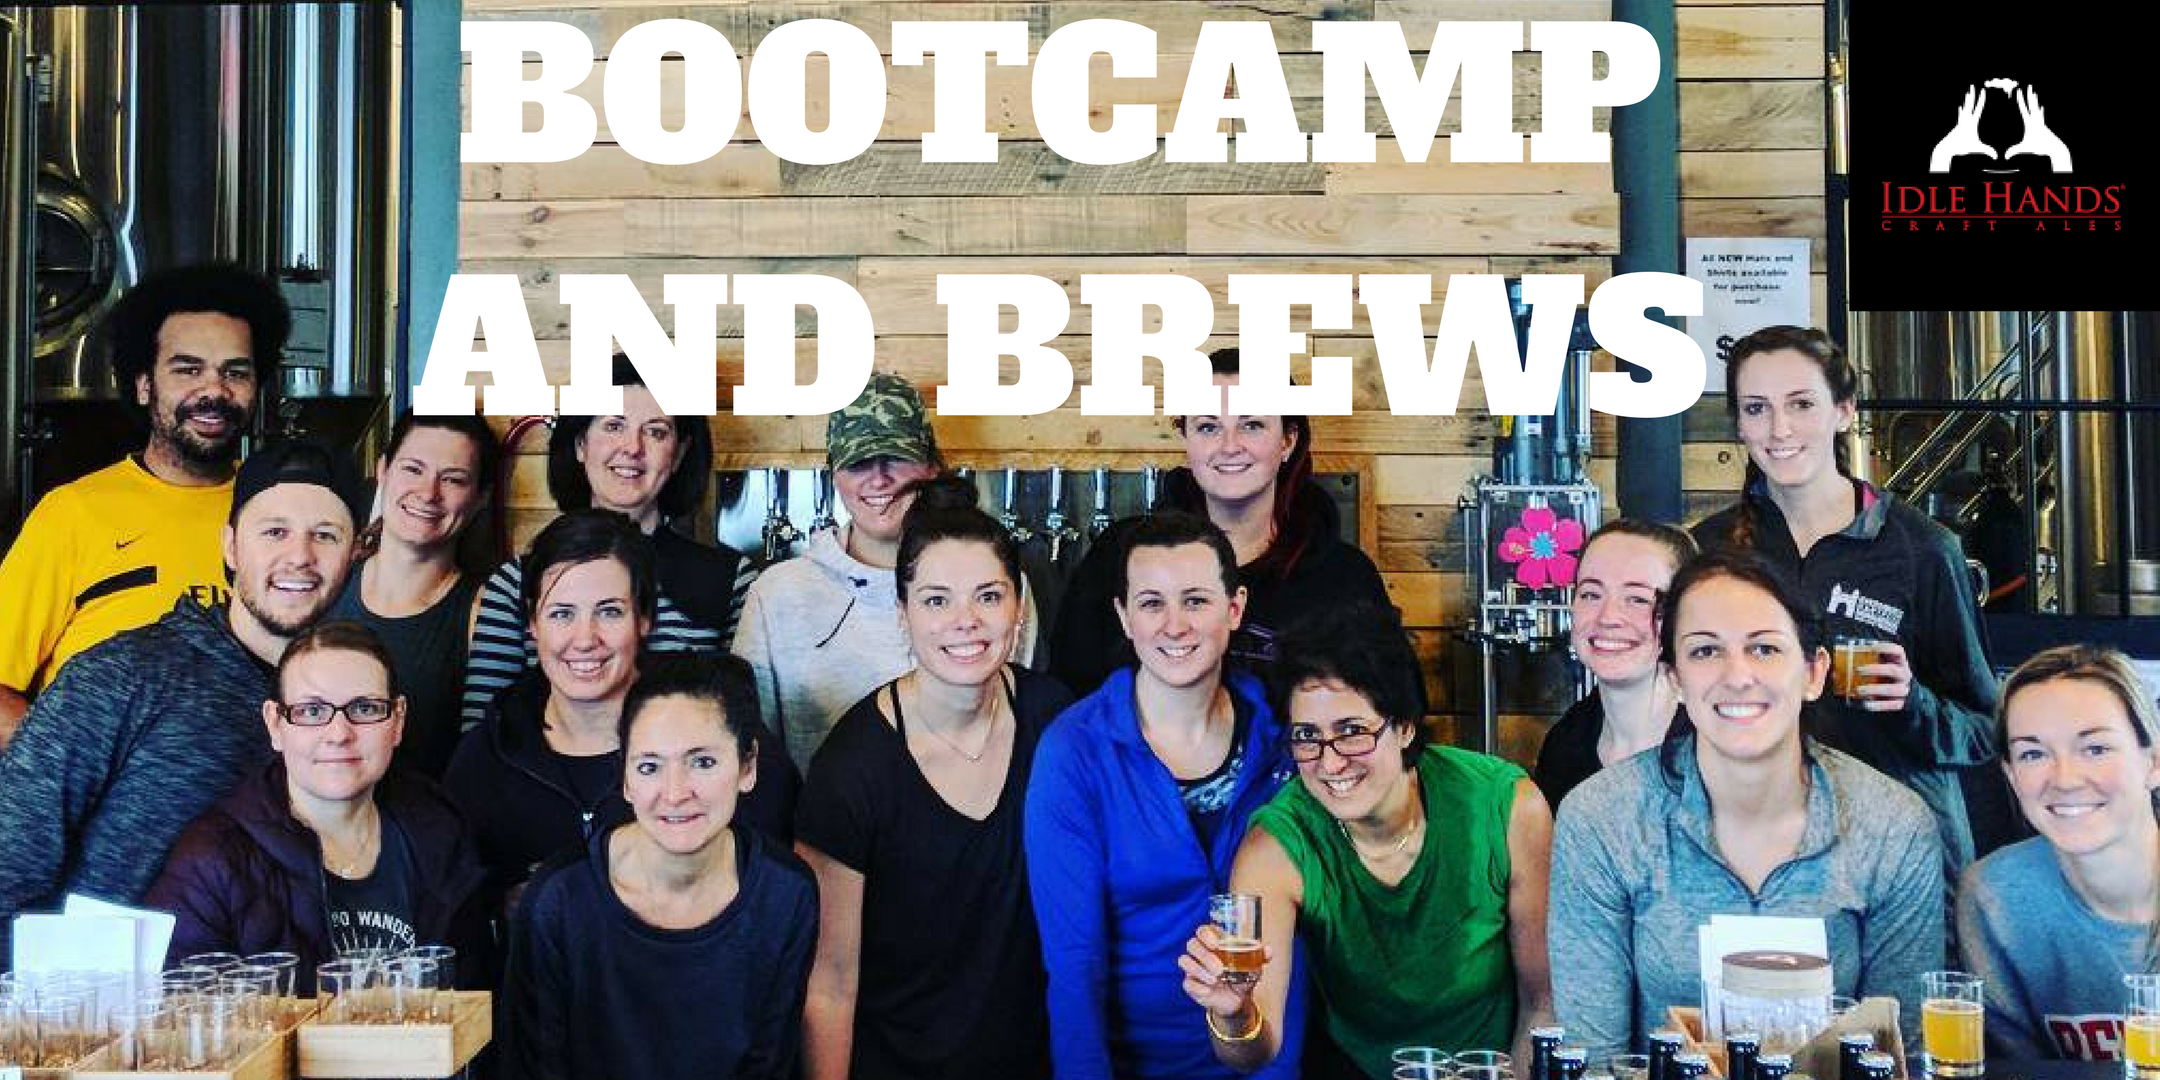 Bootcamp and Brews @ Idle Hands